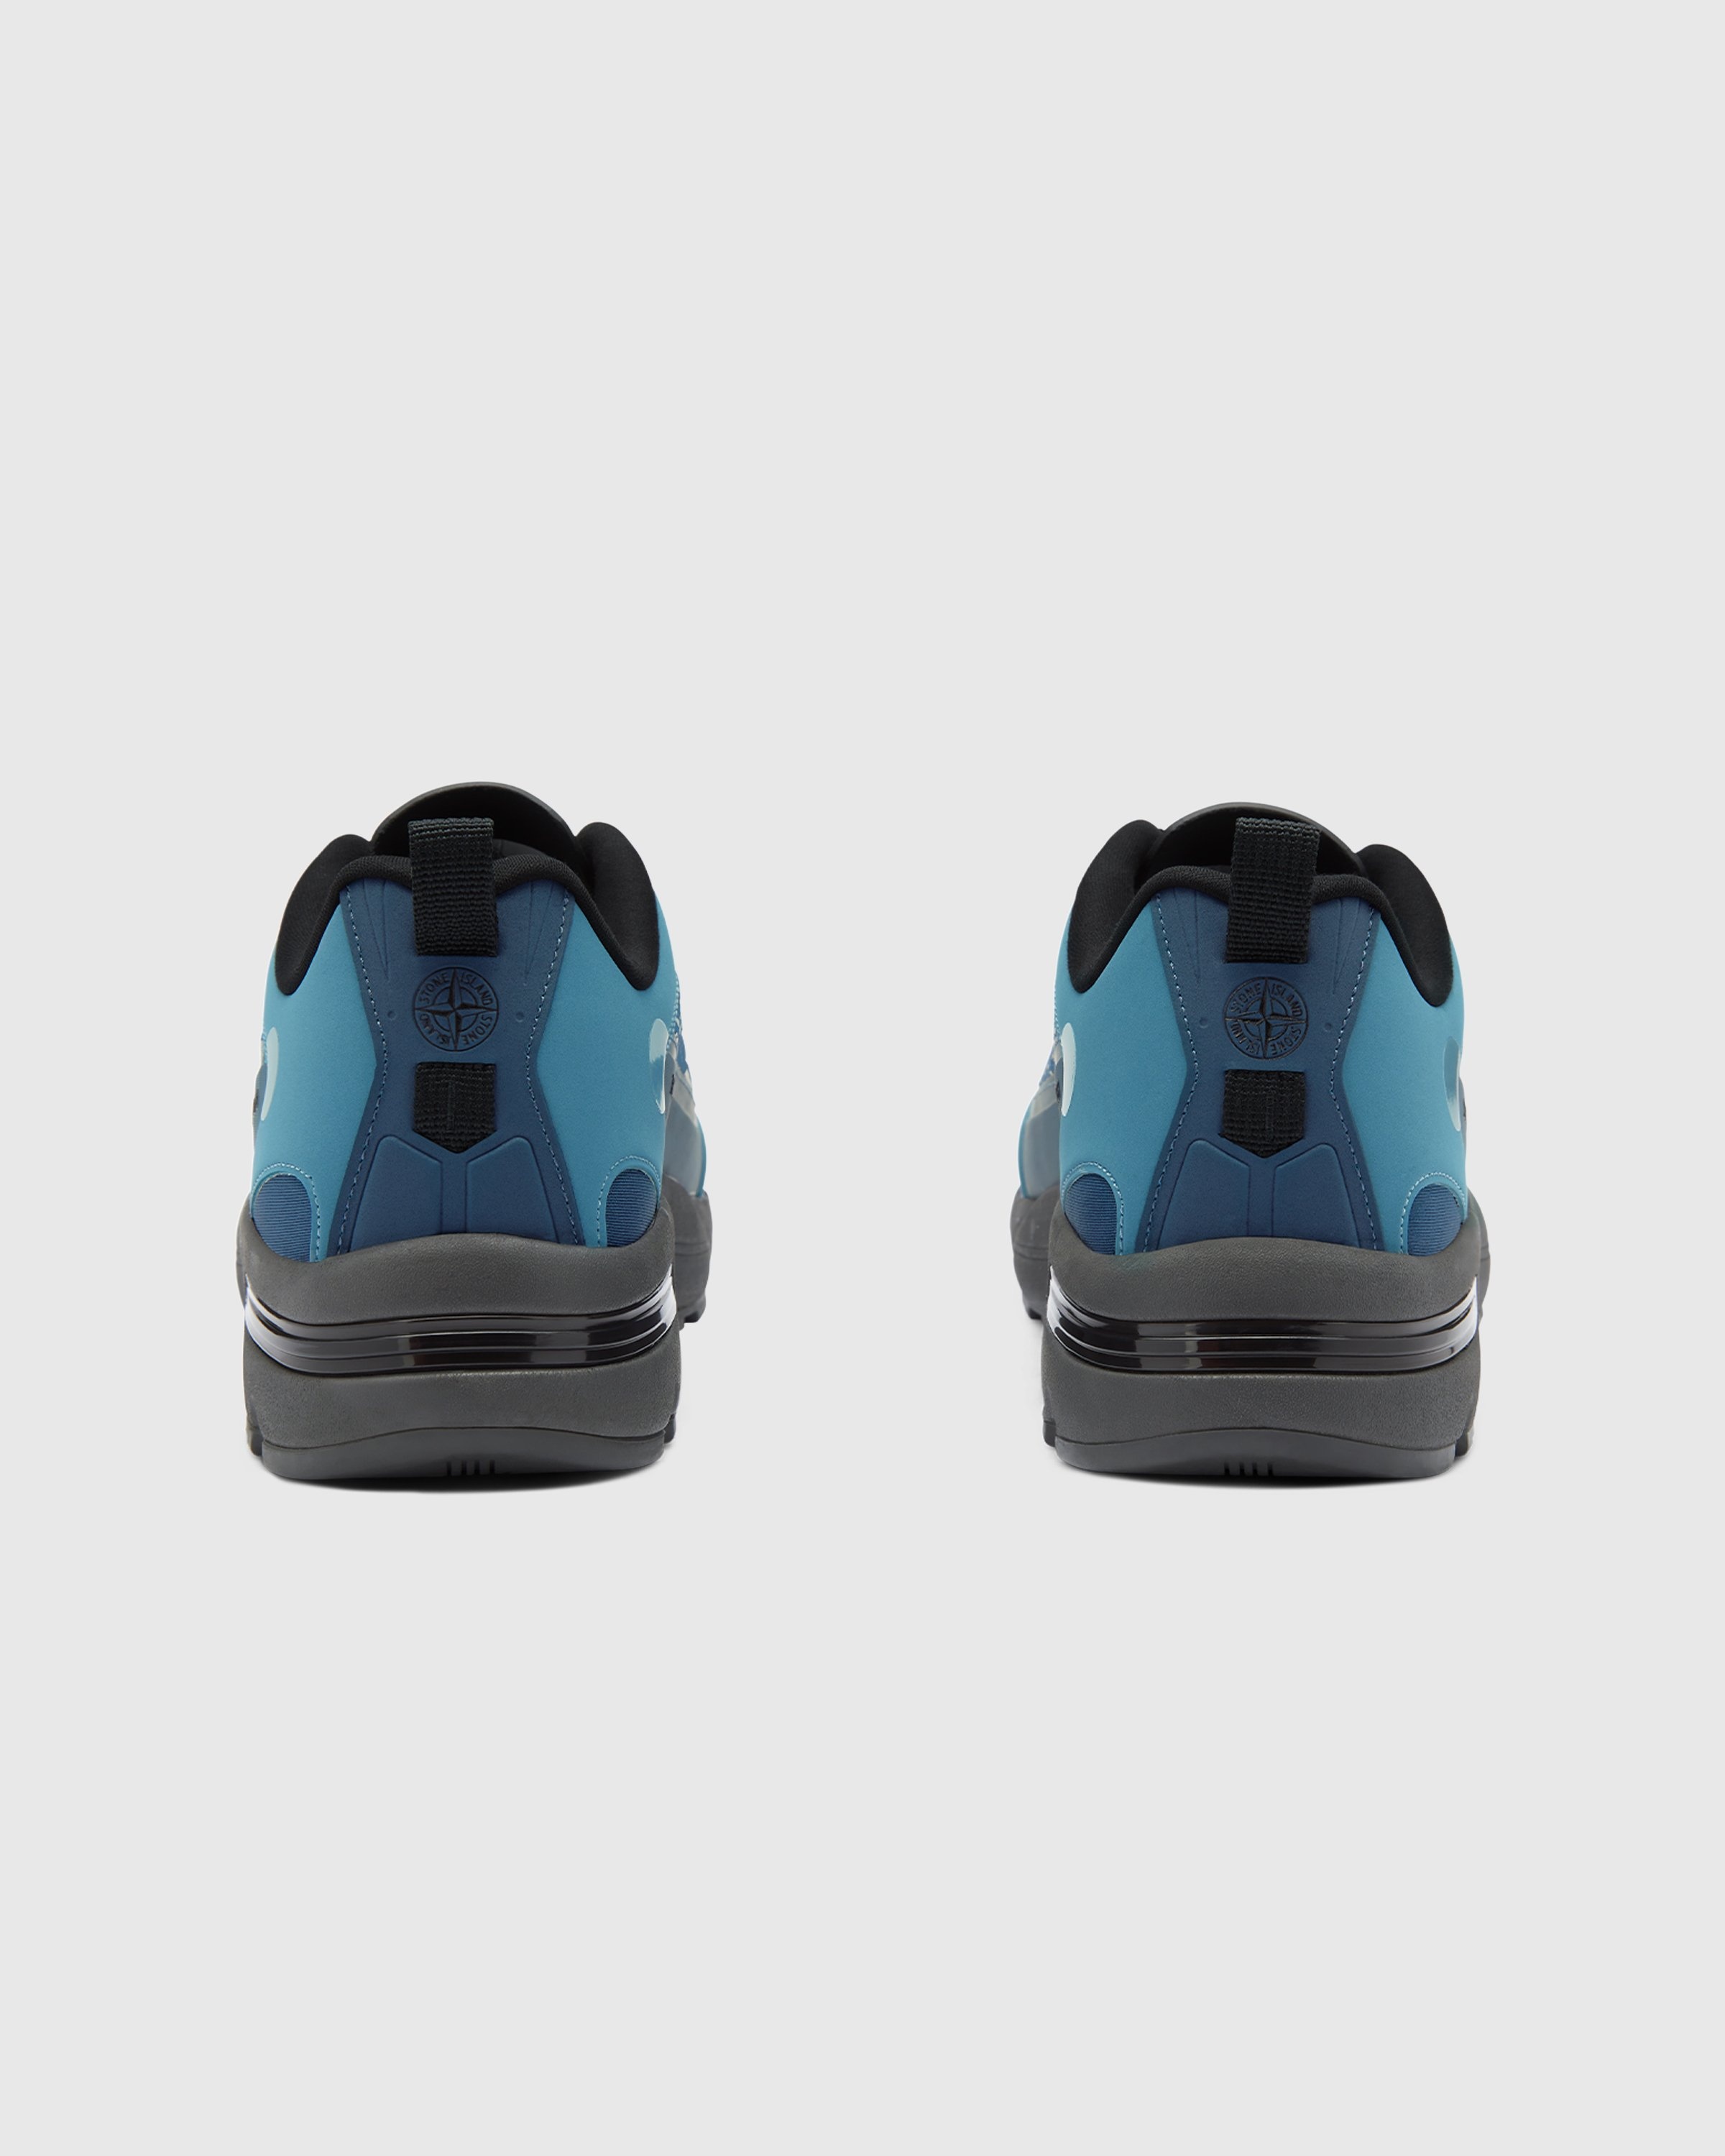 Stone Island – Grime Turquoise 78FWS033 - Sneakers - Blue - Image 3